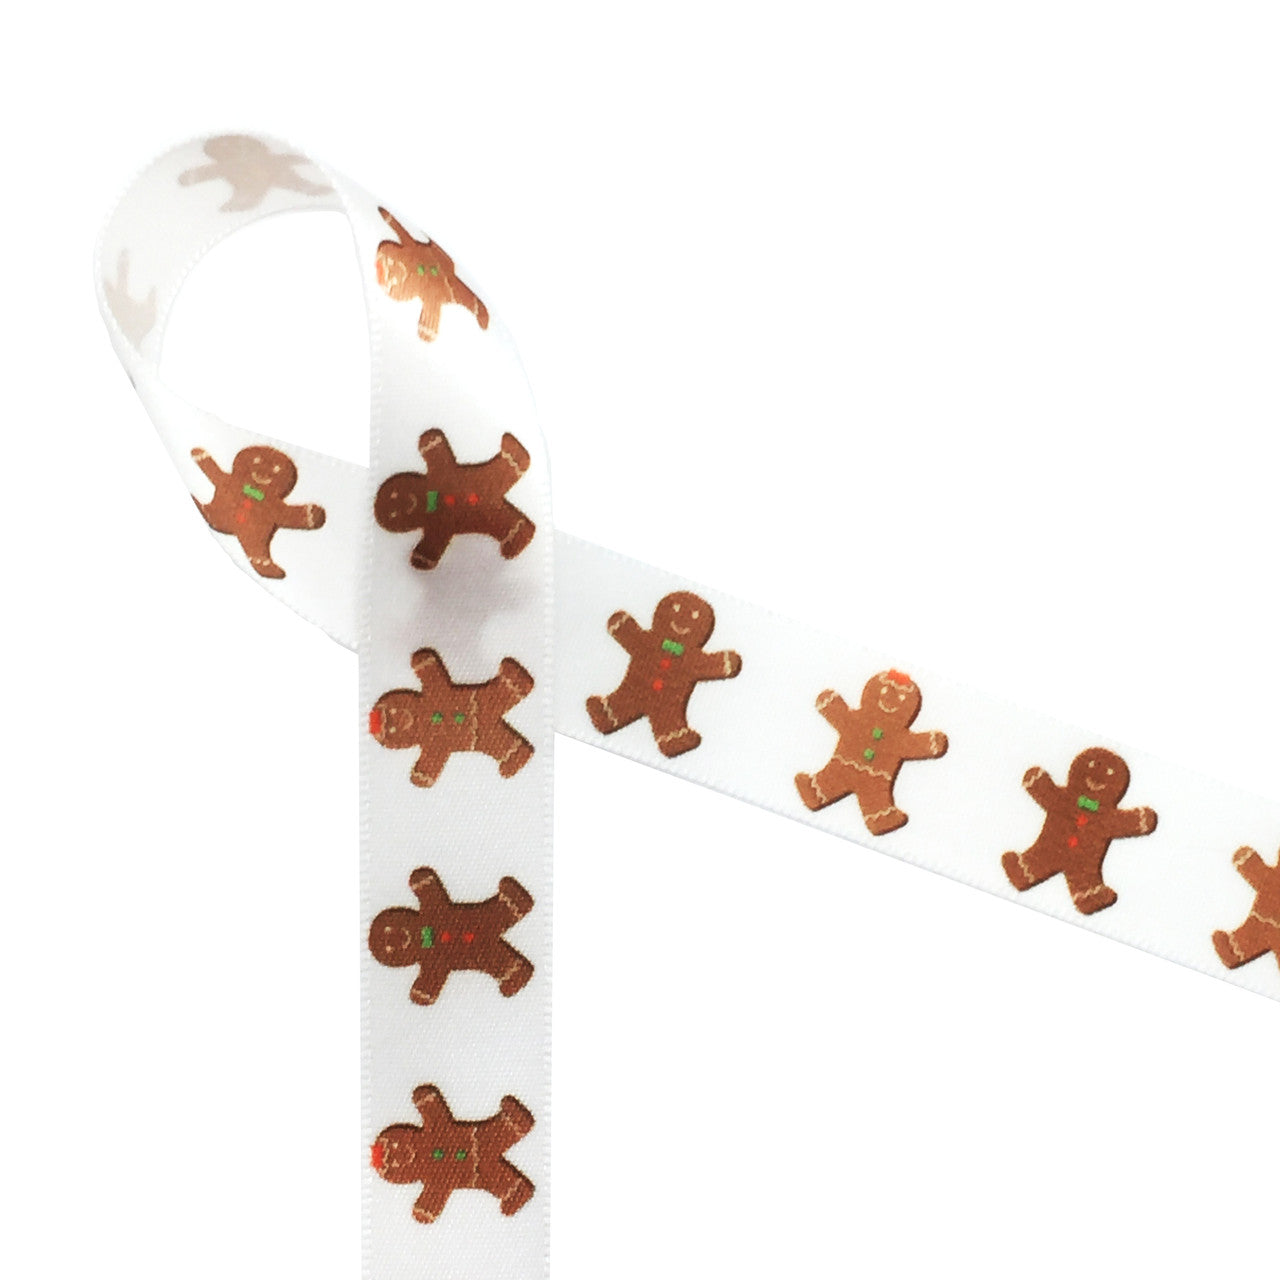 Gingerbread men in a row printed on 5/8" white single face satin ribbon is the ideal ribbon for Holiday cookie gifts. This is a great ribbon for cookie platters, gift baskets, party favors, party decor, Holiday gift wrap, crafting, sewing and quilting projects. All our ribbon is designed and printed in the USA